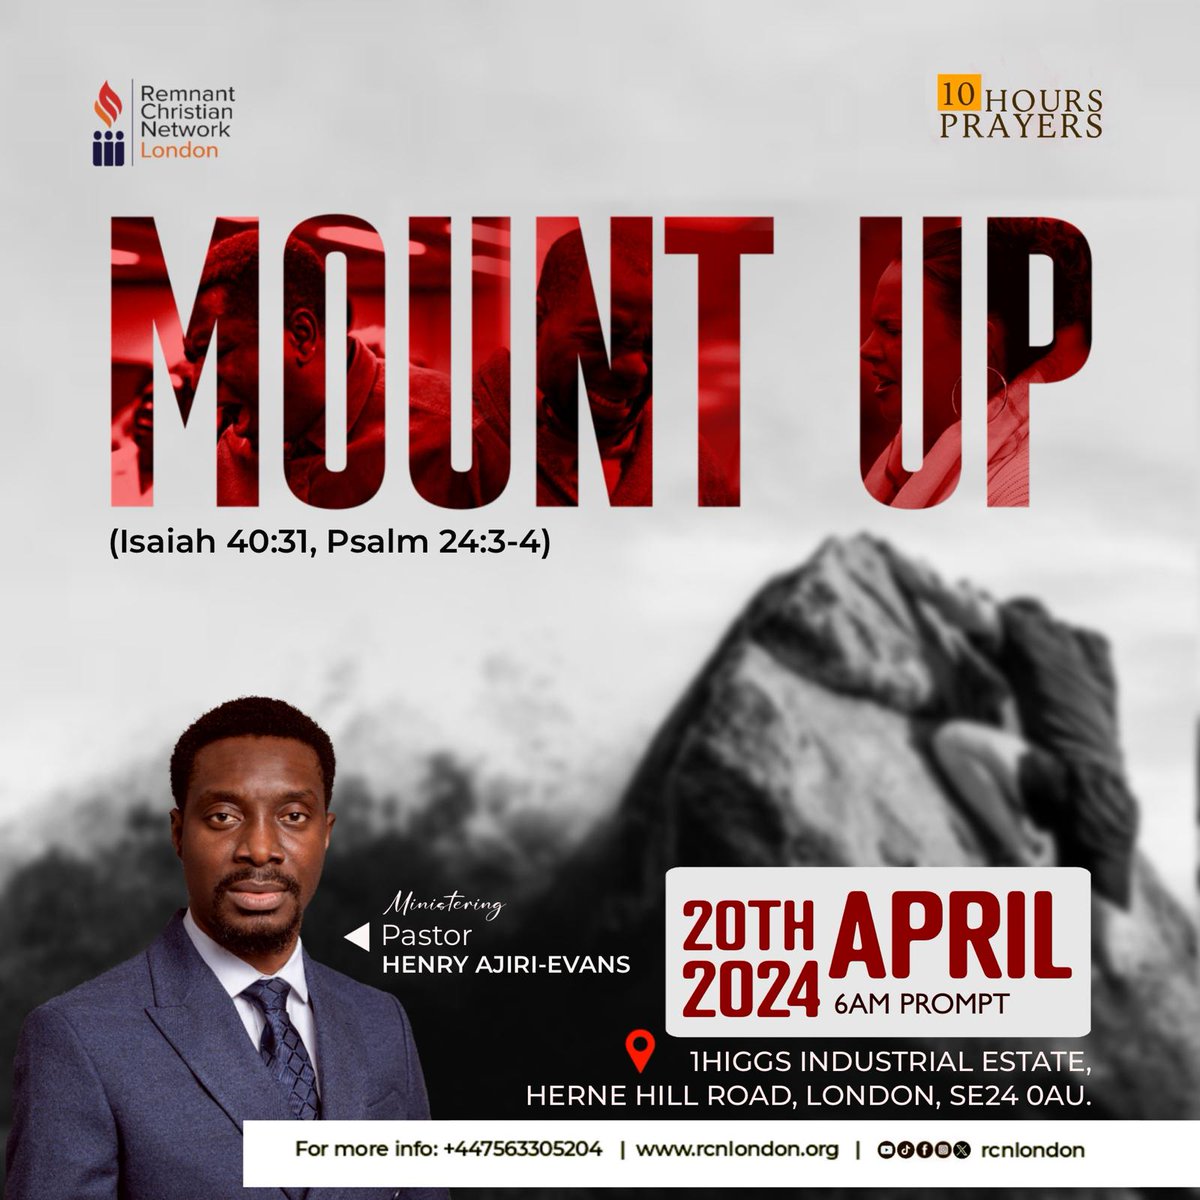 The countdown has begun! 10 DAYS TO GO! They shall mount up with wings like eagles.. - Isaiah 40:31 #10HoursPrayers #MountUp #RCNLondon